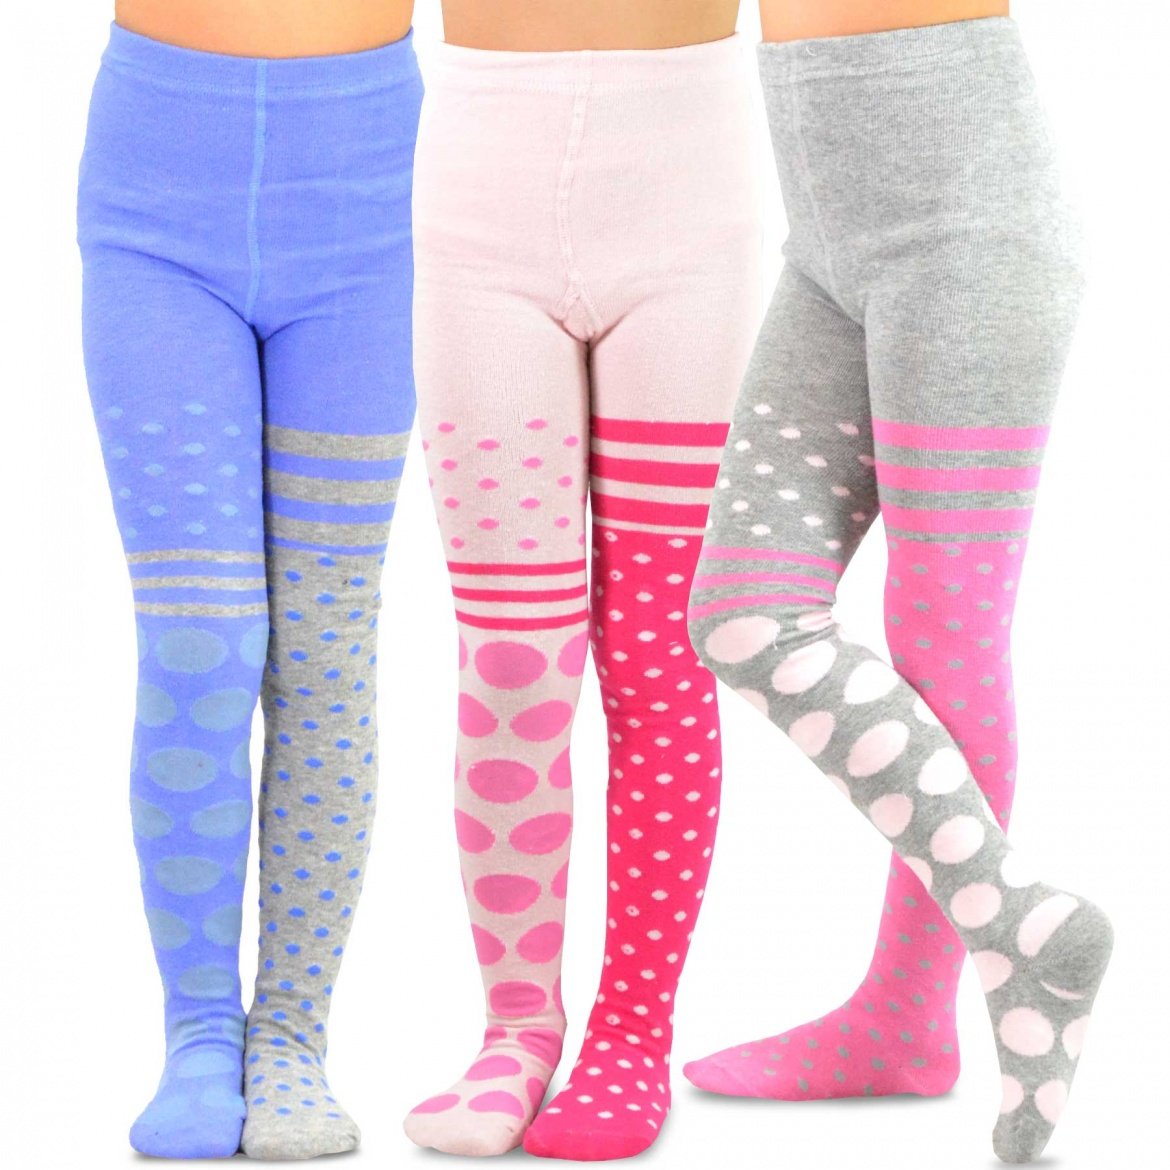 TeeHee Socks Kid's Casual Cotton Tights Big and Small Dots 3-Pack (706